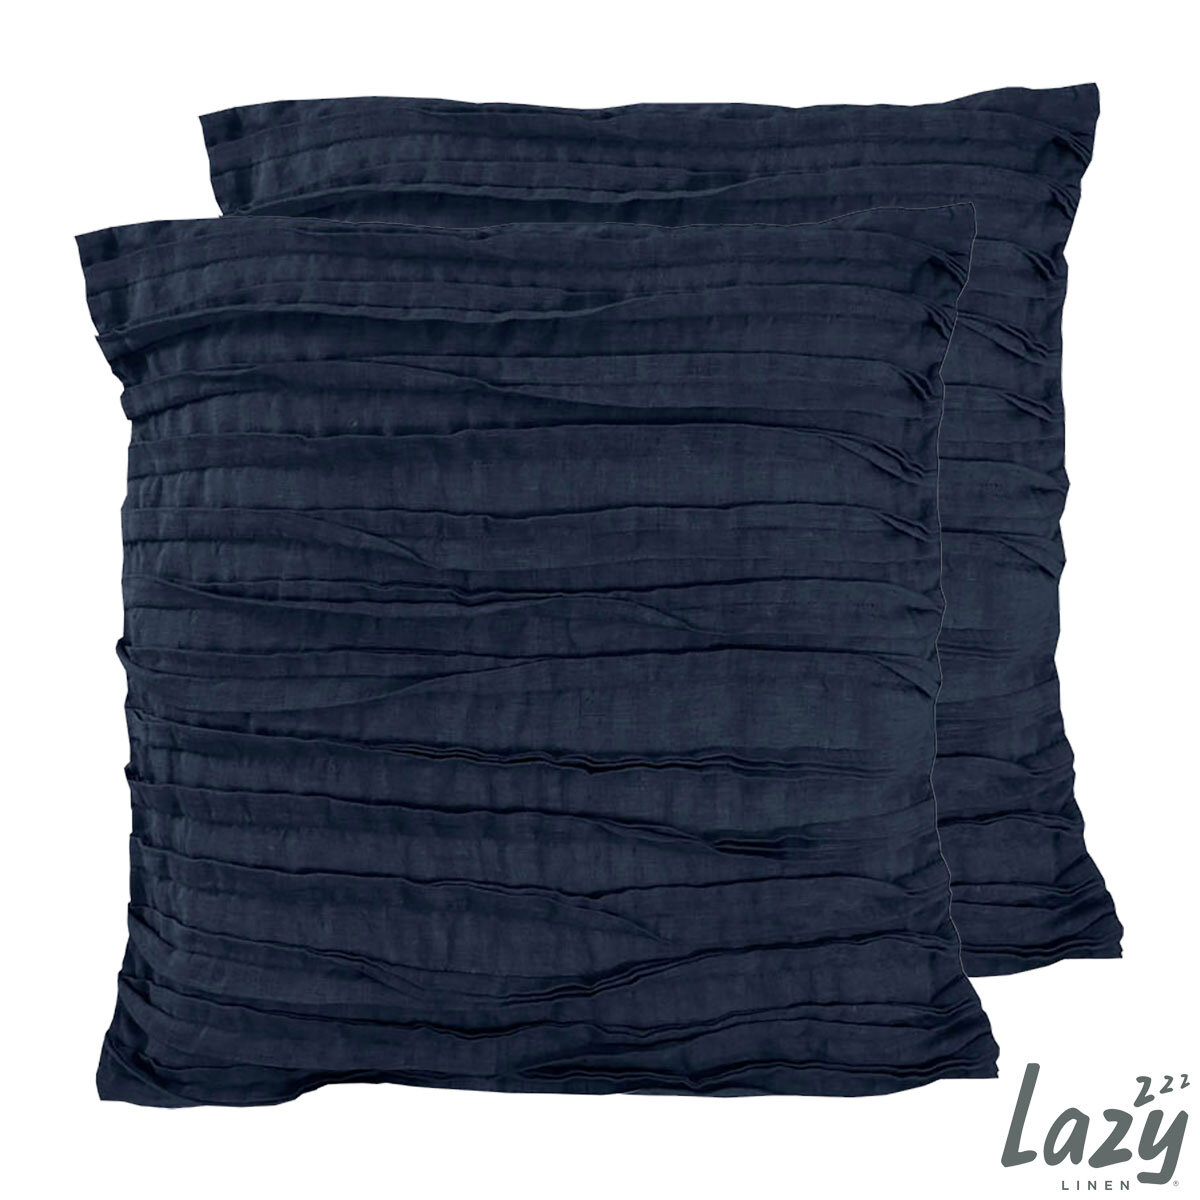 Lazy Linen 100% Washed Linen Cushion 2 Pack in Navy